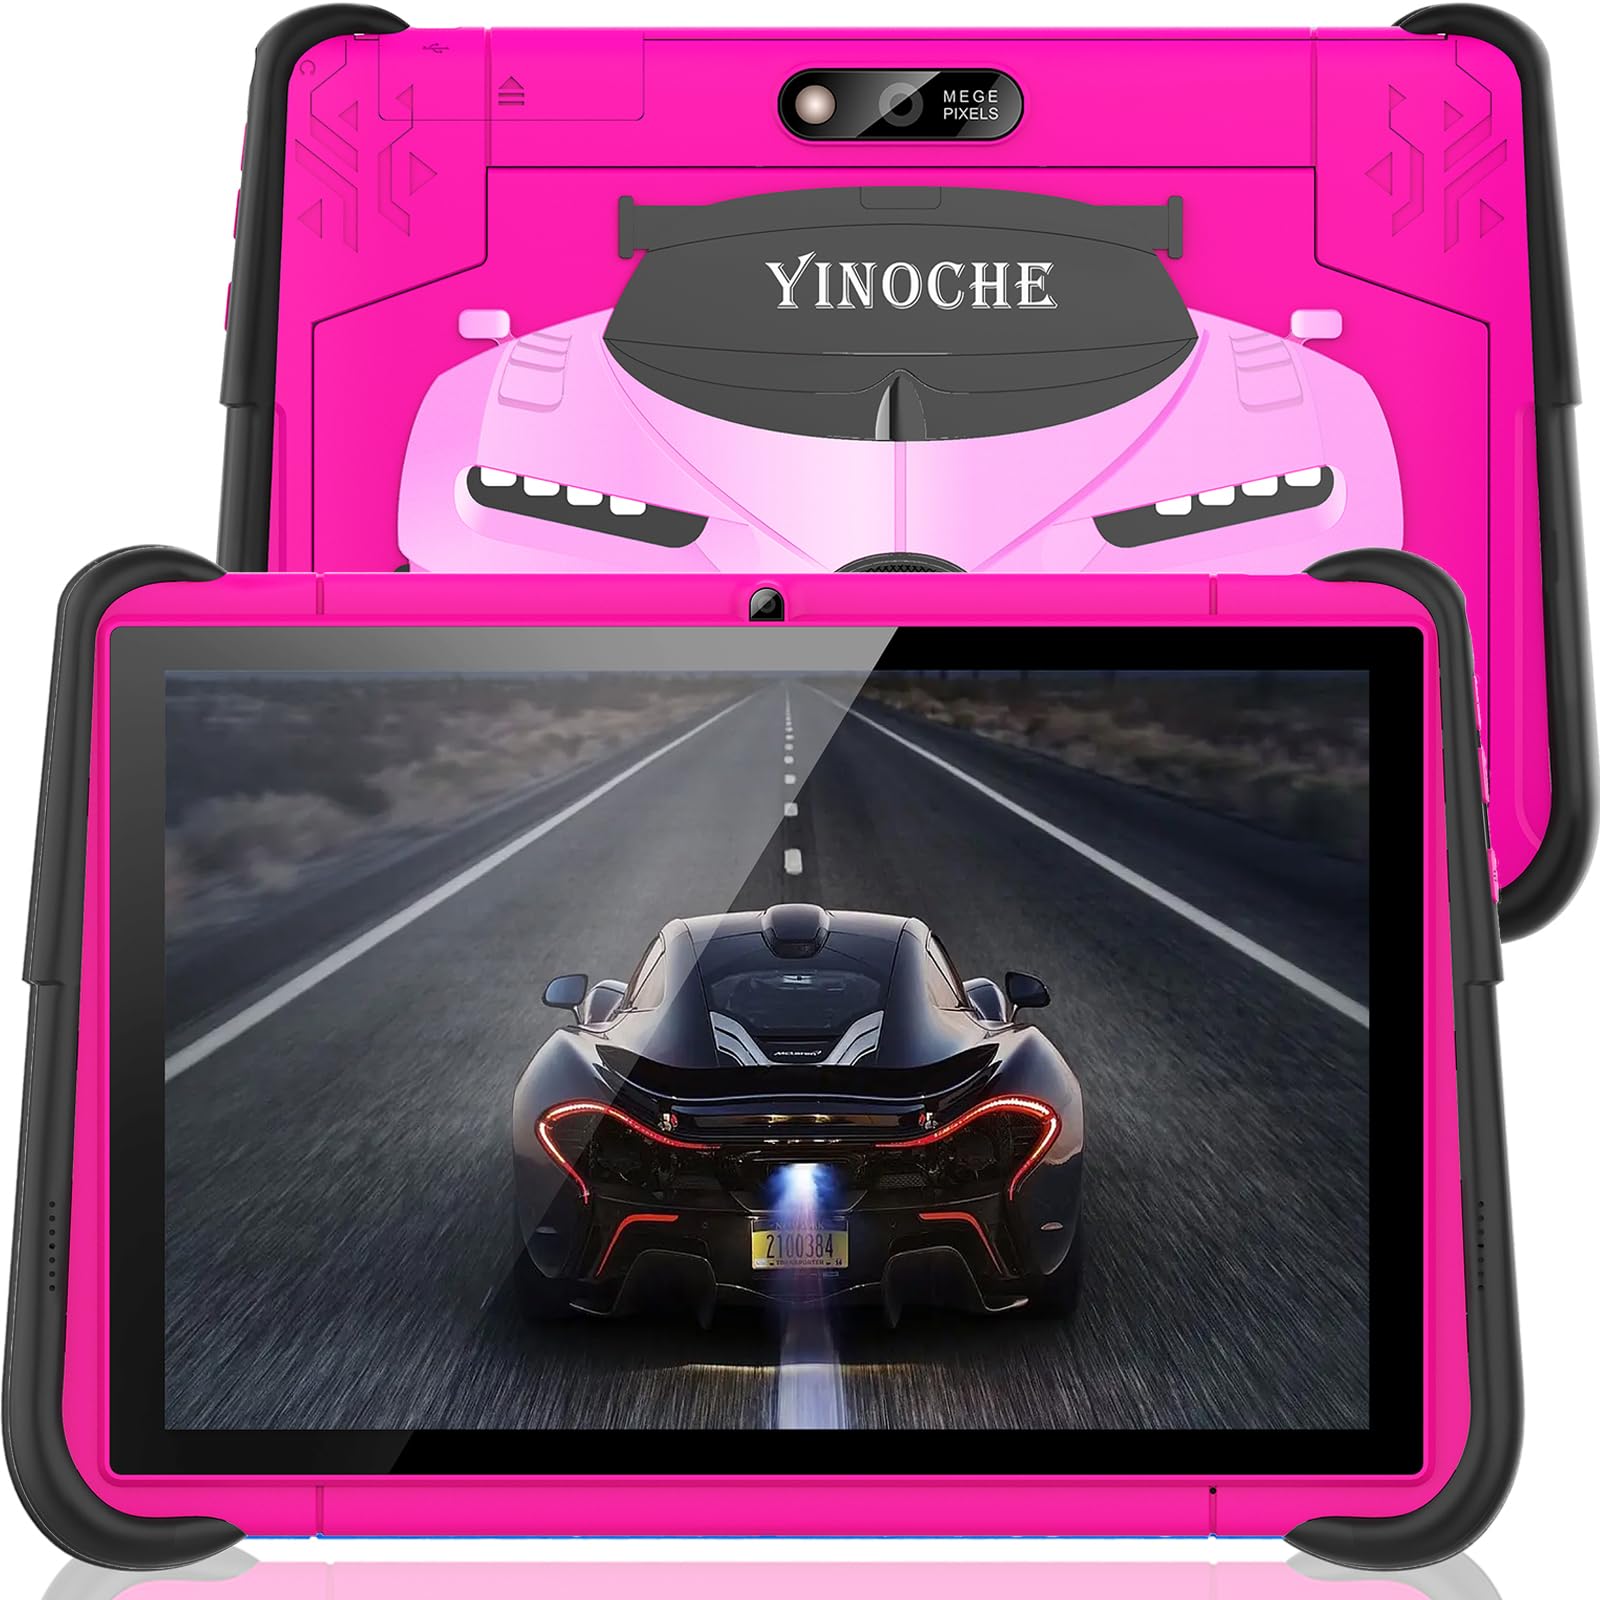 YINOCHE Kids Tablet 10 inch with Case Included Toddler Tablet for Kids WiFi Chindren's Tablet Android Kids Tablets for Toddlers 32G Parental Control Support YouTube Netflix for Boys Girls (Pink)